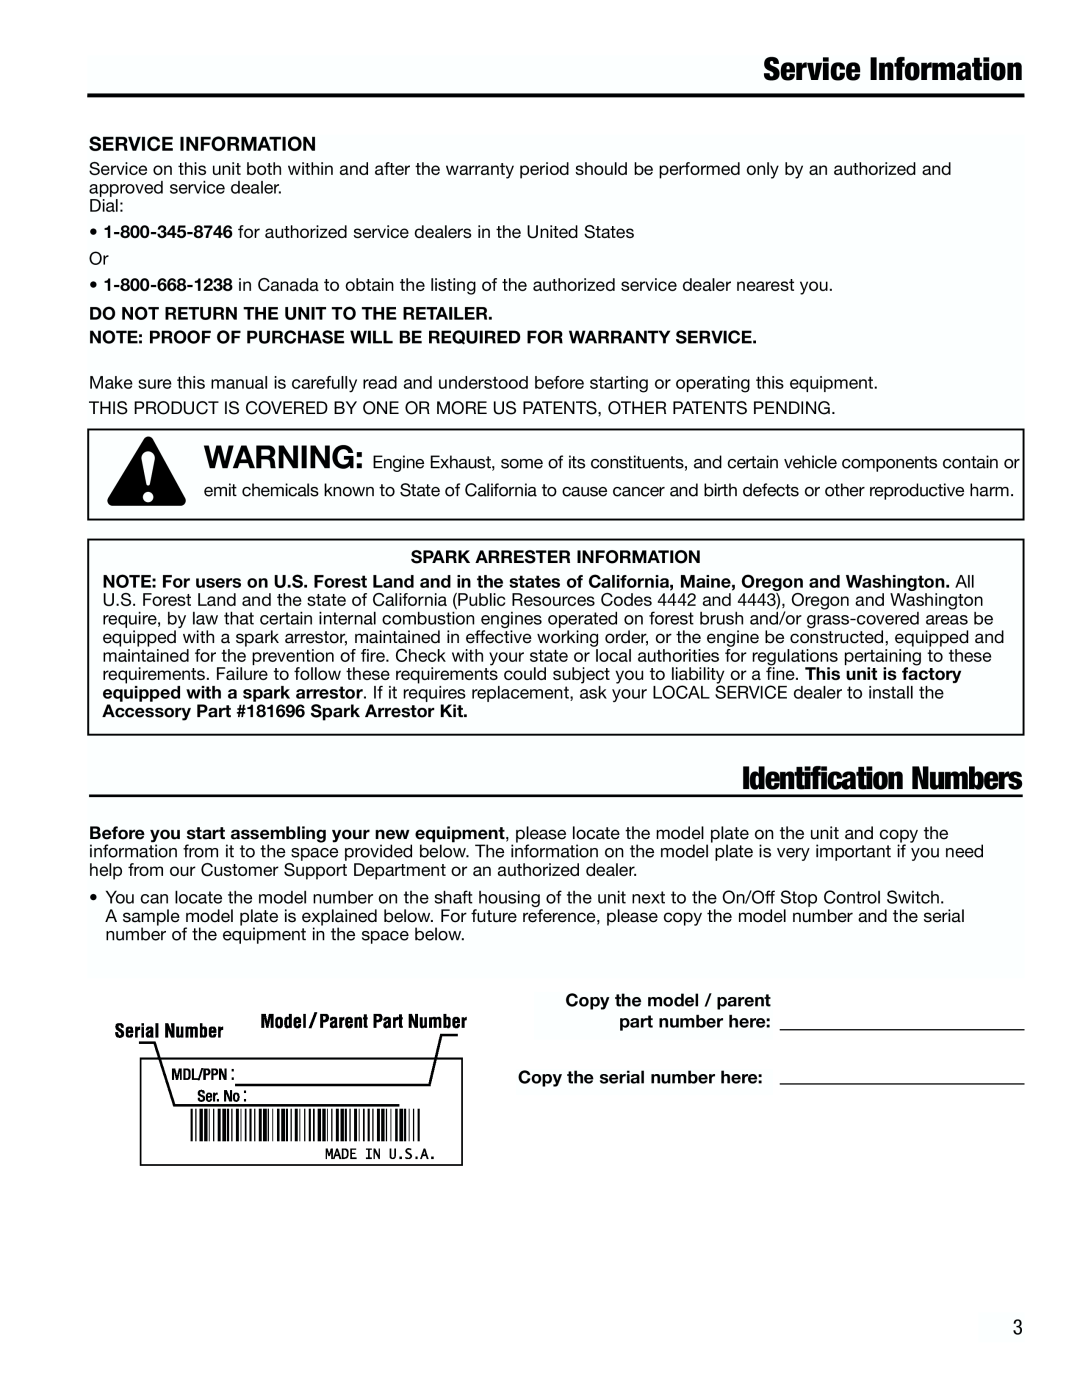 Troy-Bilt TB3000 manual Service Information, Identification Numbers, Do Not Return The Unit To The Retailer 